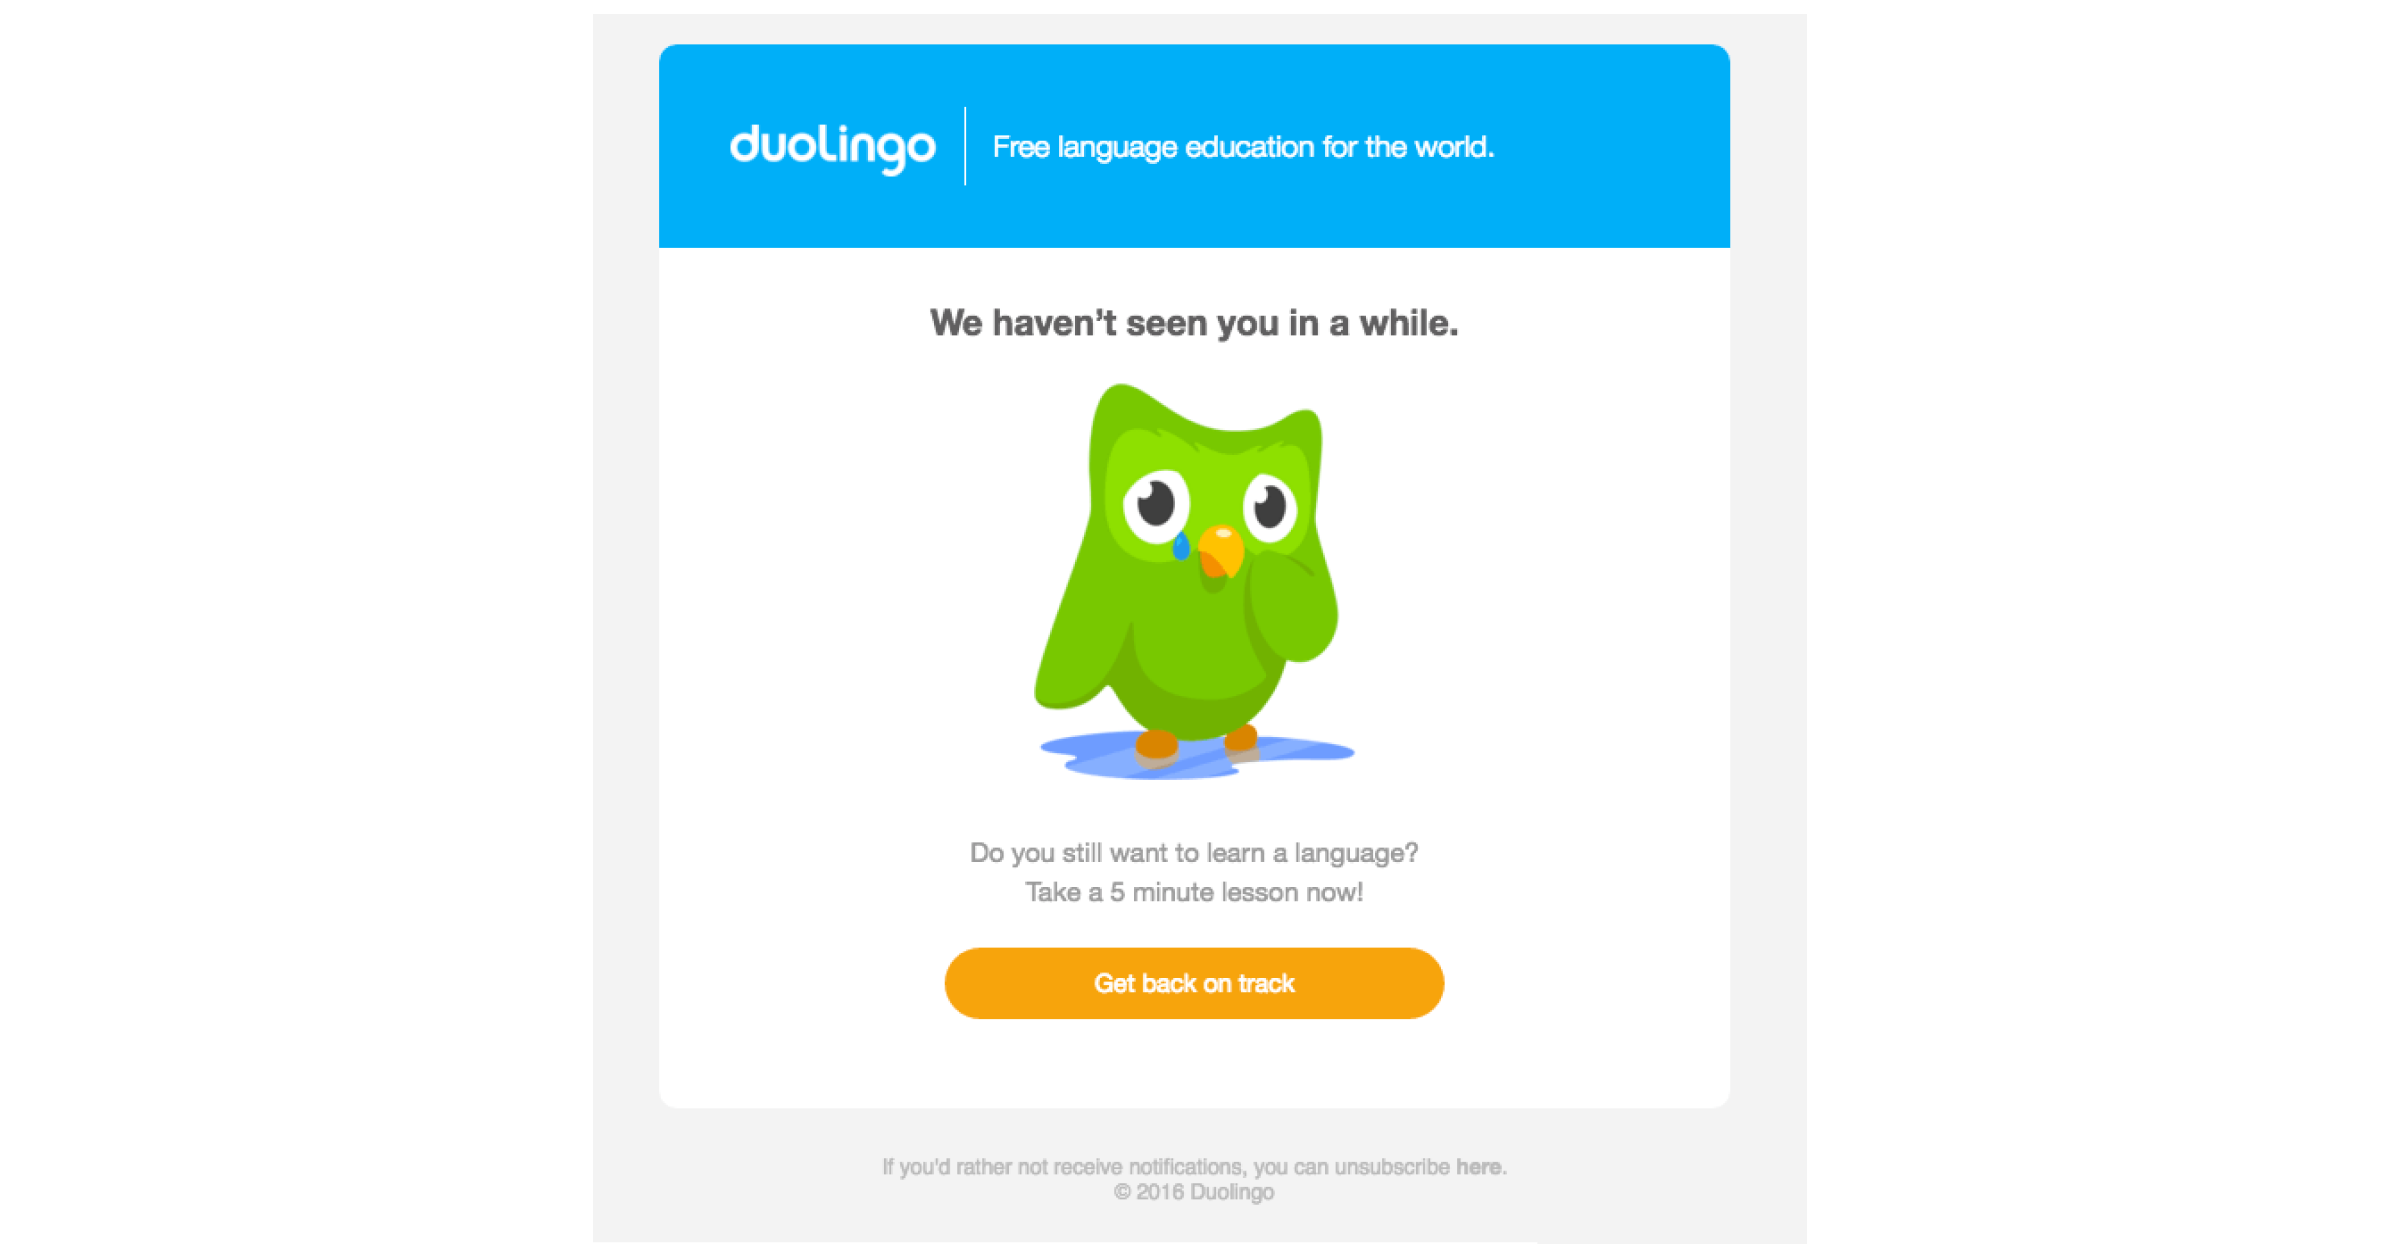 Re-engagement email example by Duolingo